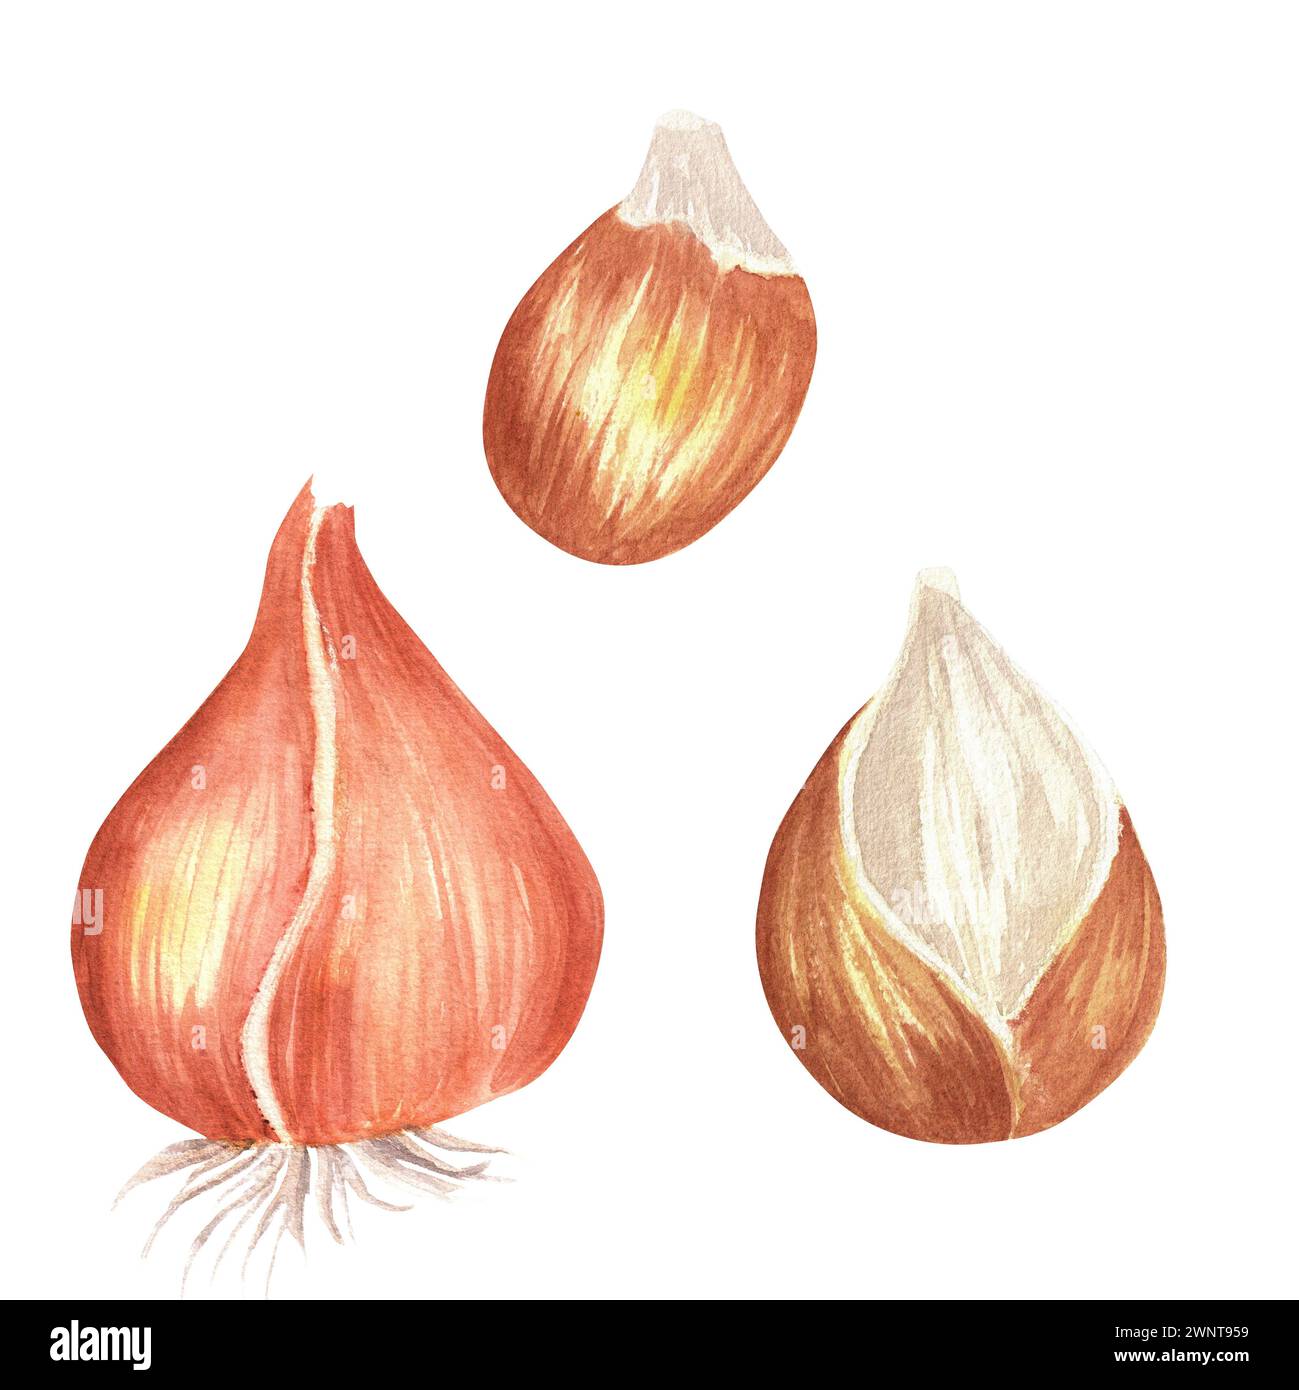 Hand-drawn watercolor illustration. Flower bulbs for any decorative projects like printing design, scrapbooking and others. Stock Photo